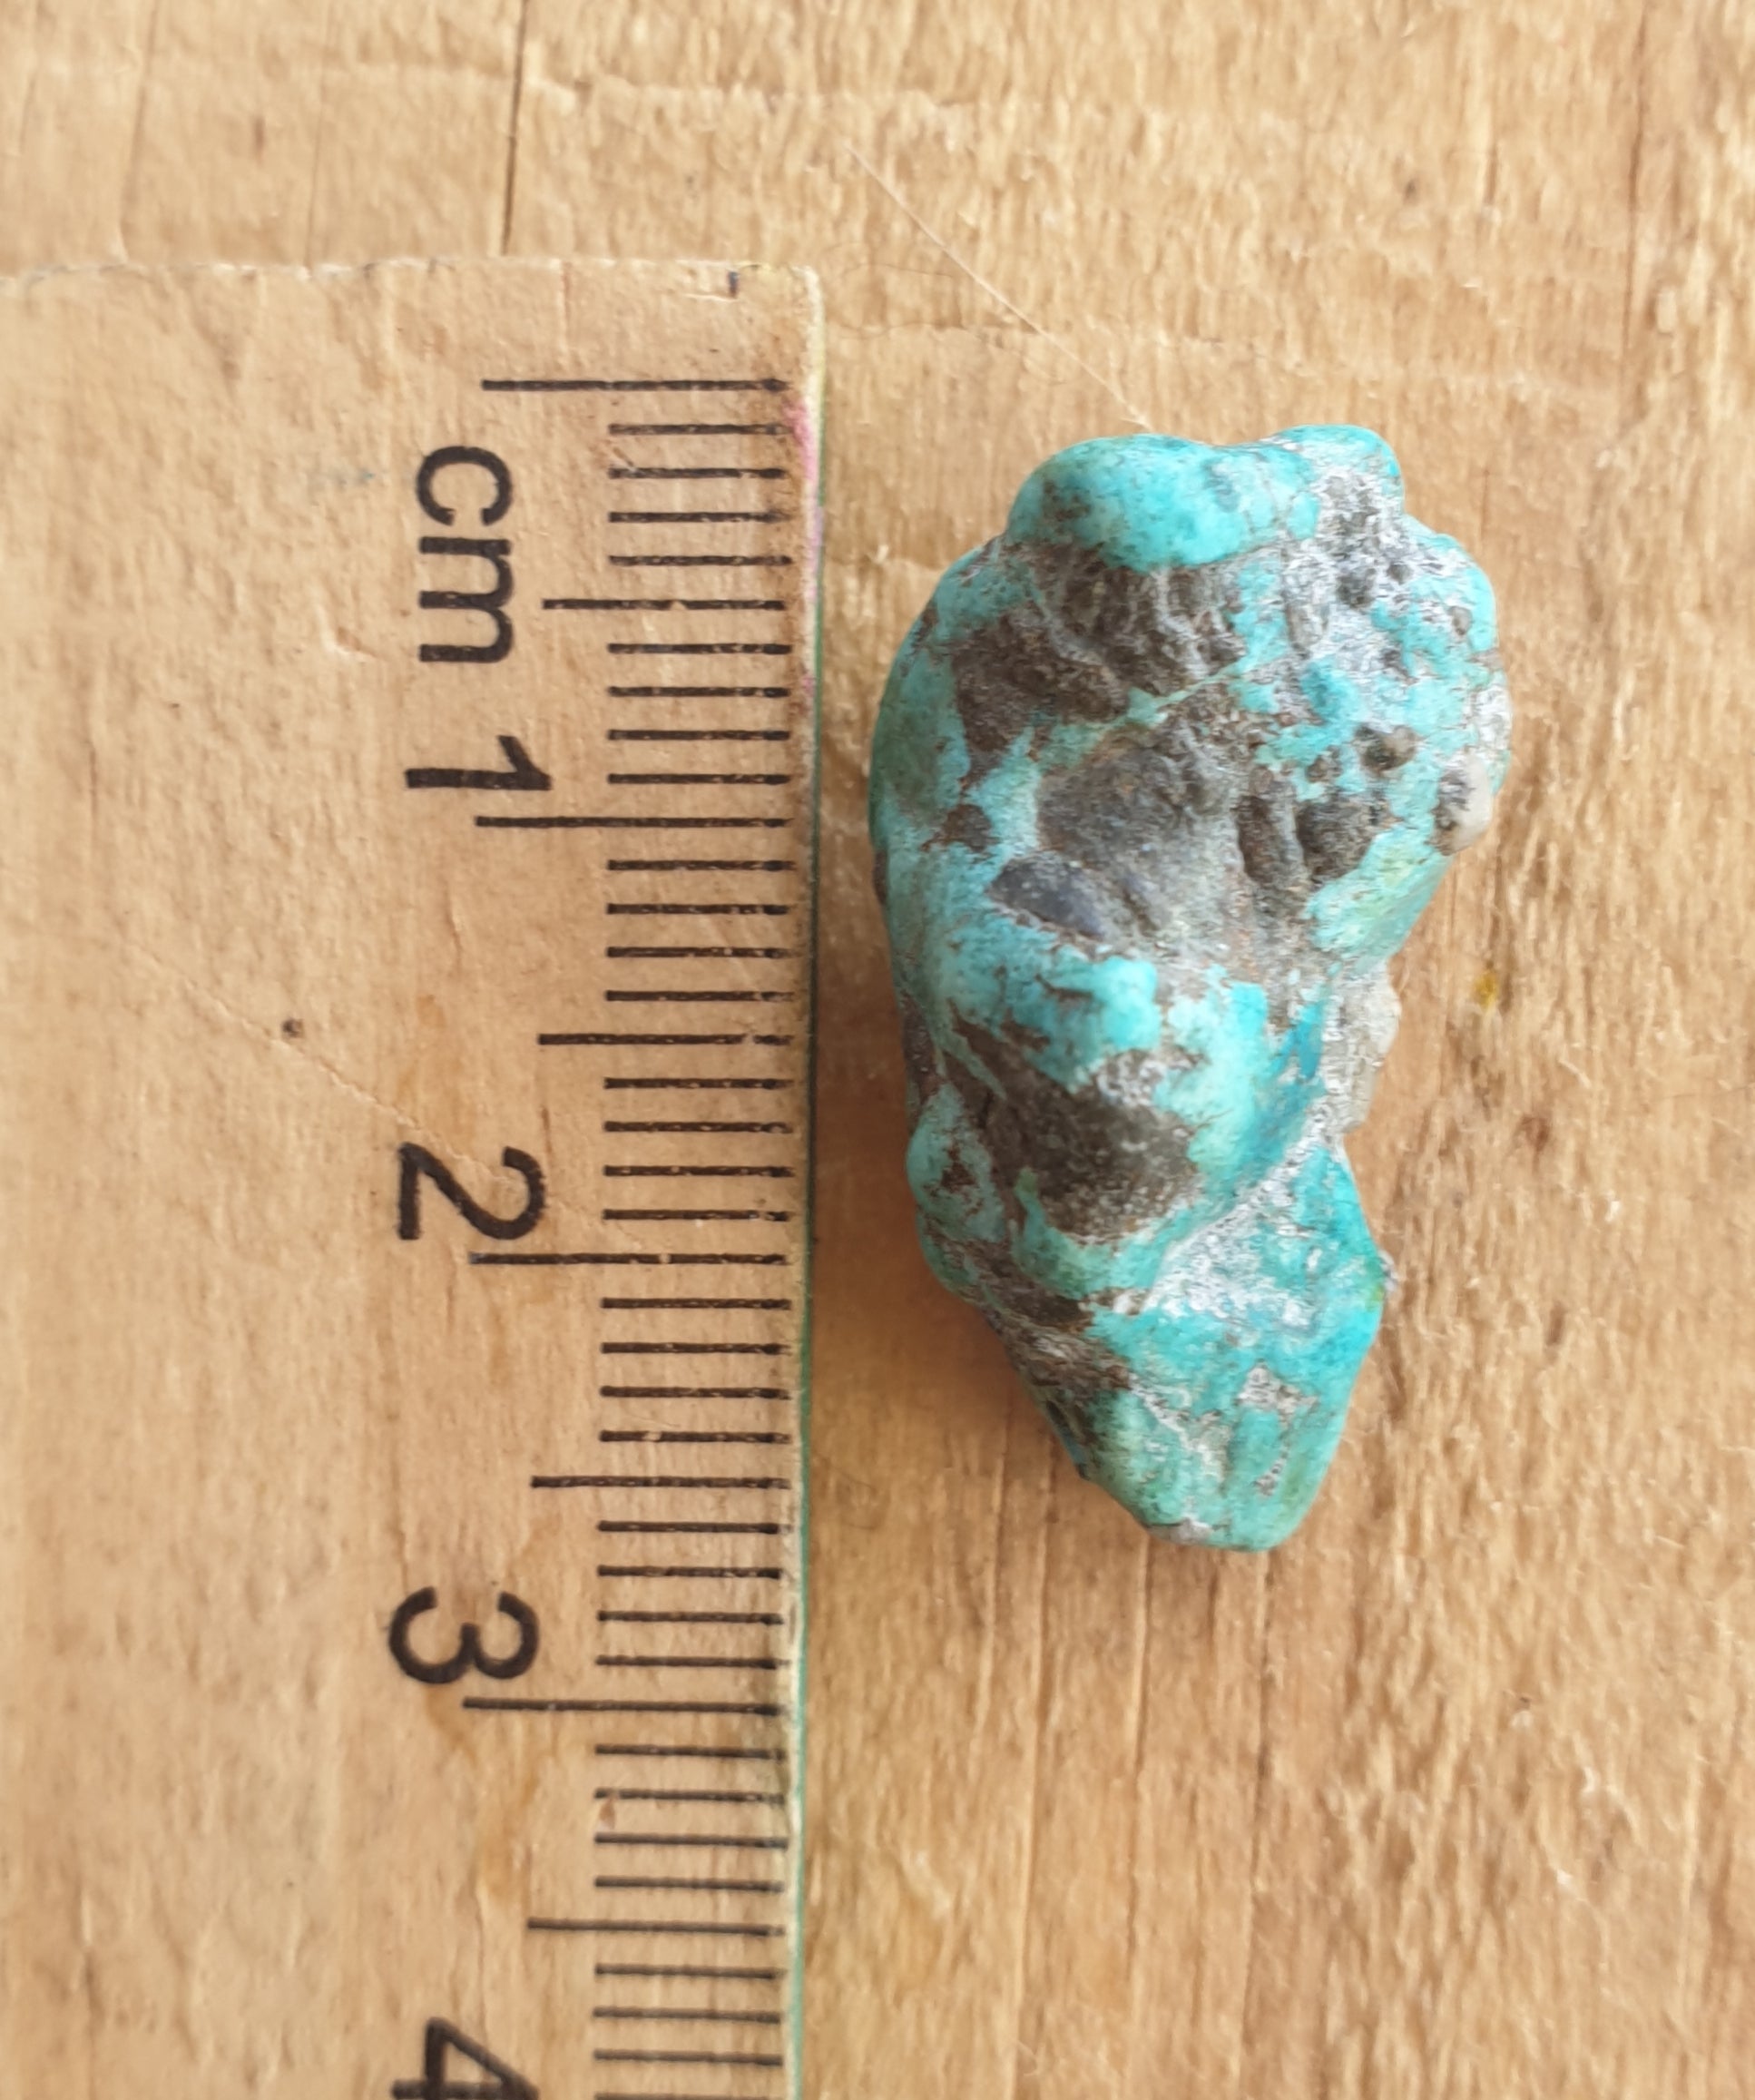 Turquoise nugget bead - genuine real turquoise